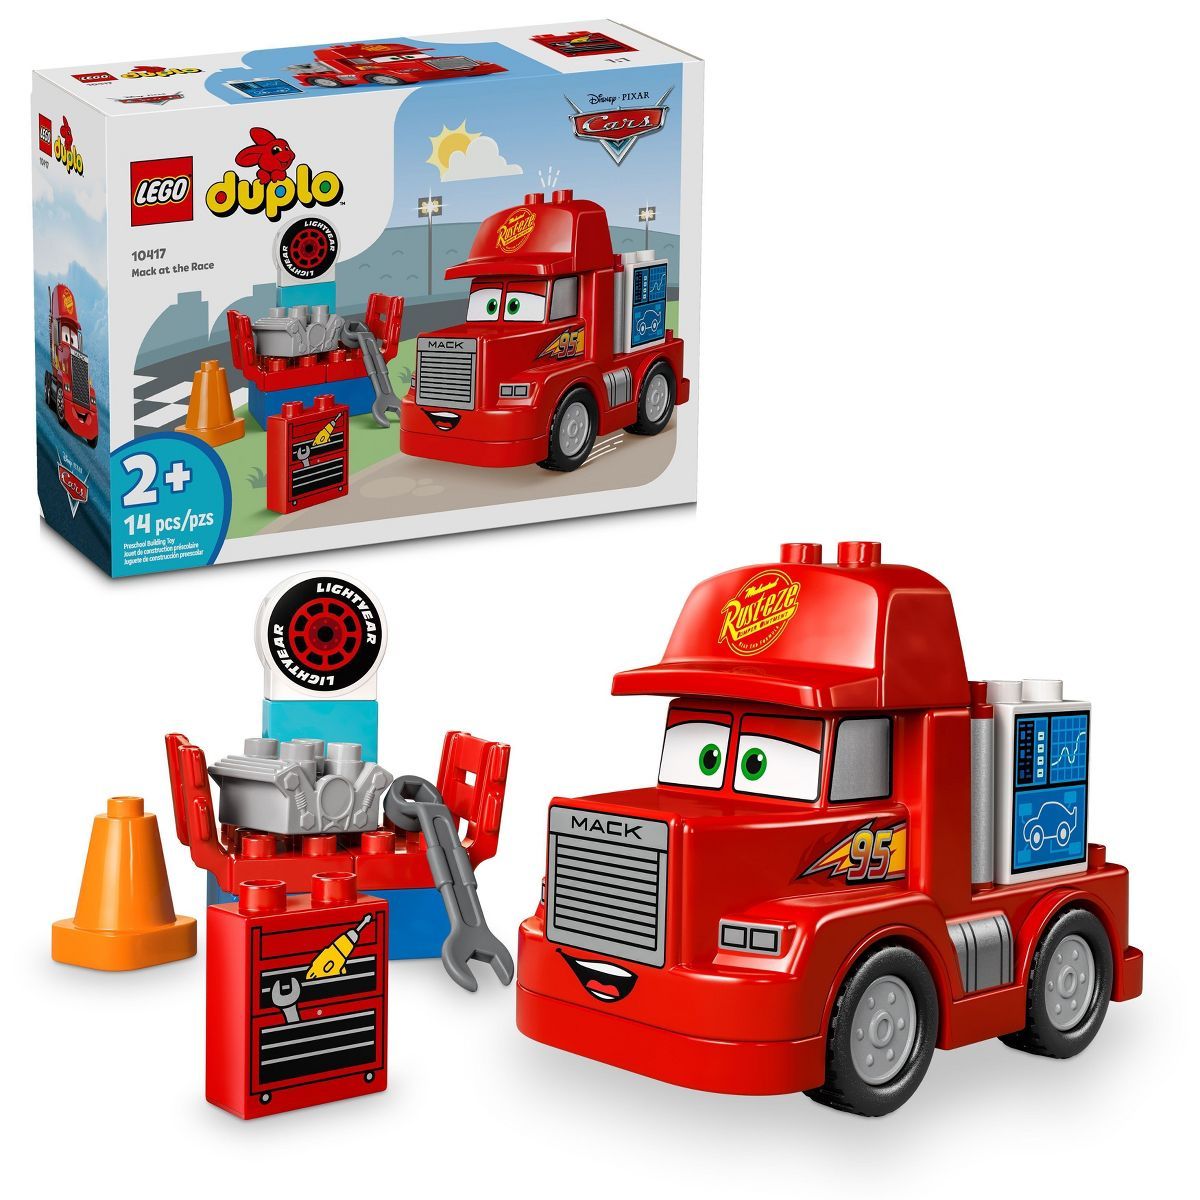 LEGO DUPLO Disney and Pixar's Cars Mack at the Race Toddler Toy 10417 | Target